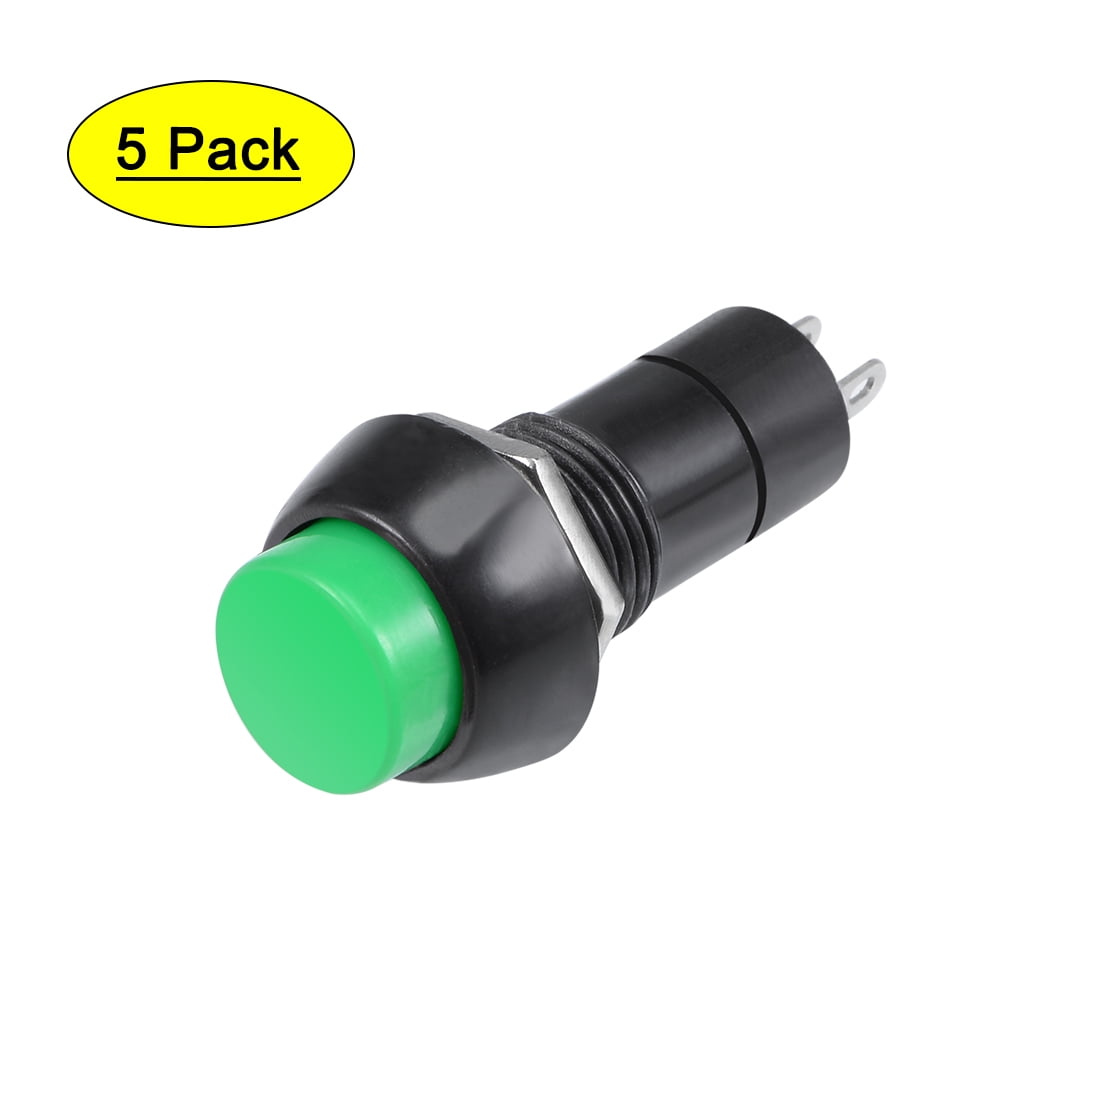 2 x Green Off- On Momentary Round Push Button Switch 12mm SPST 